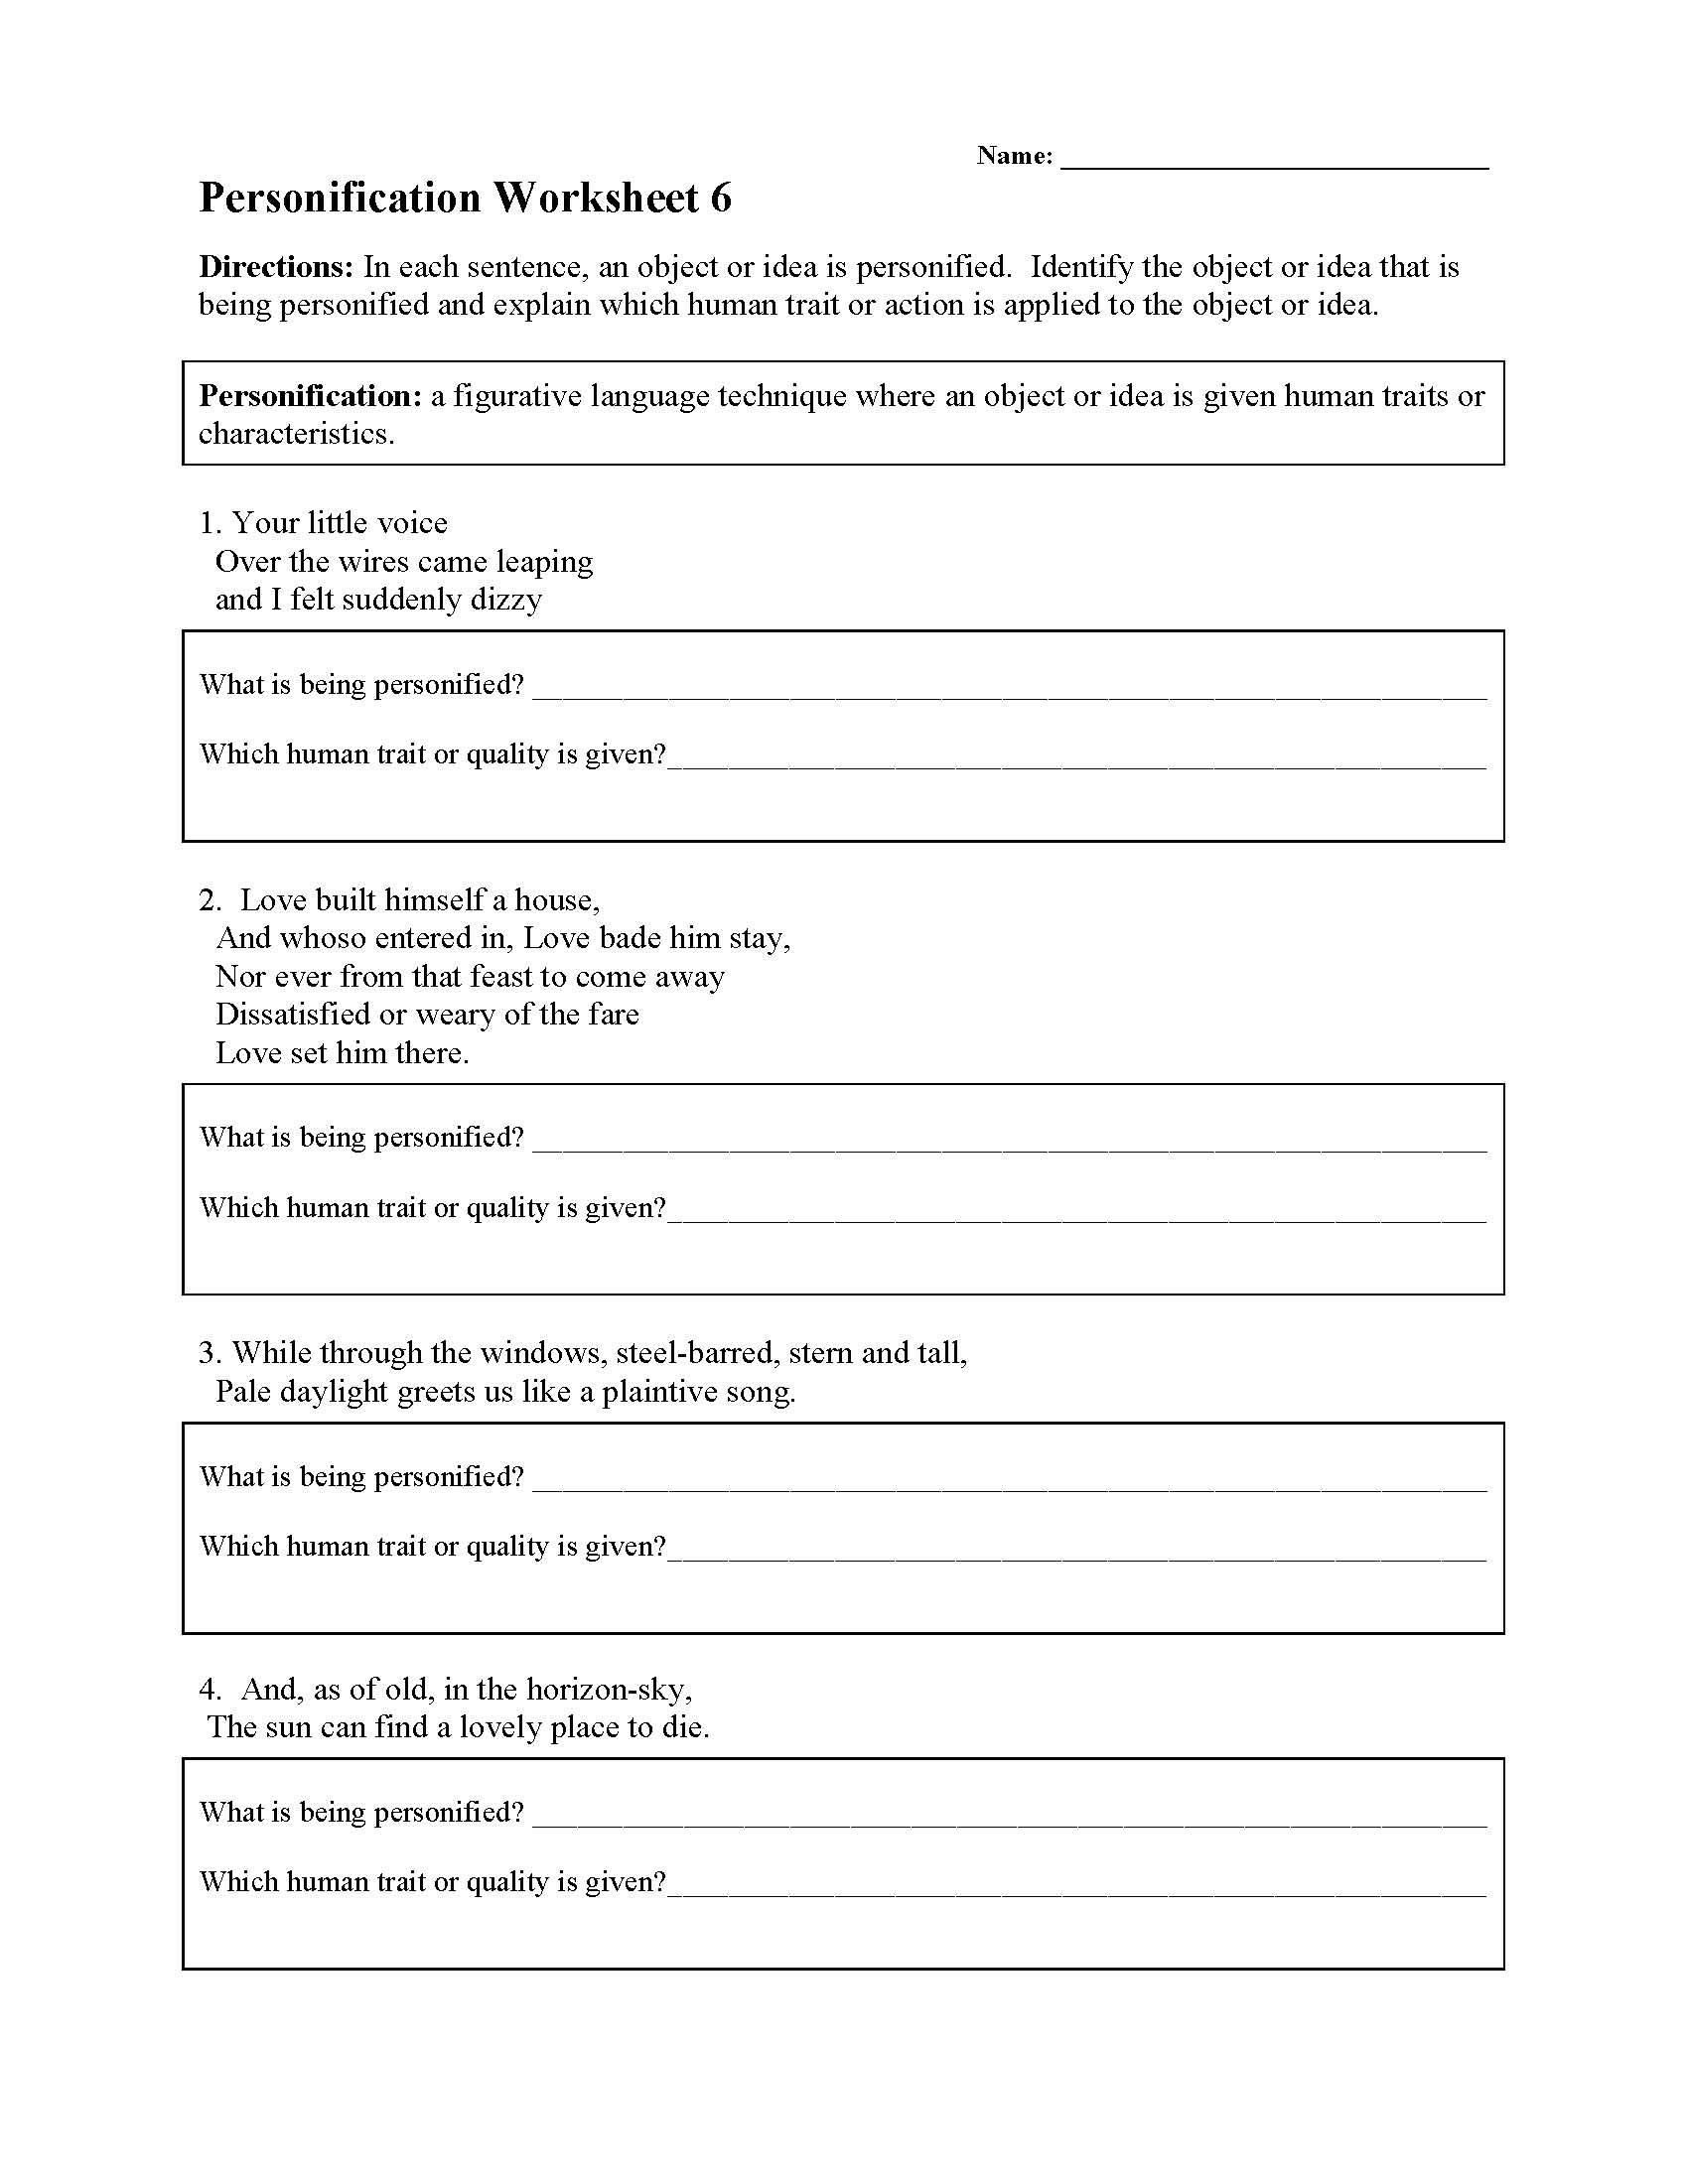 Personification Worksheet 6 | Preview